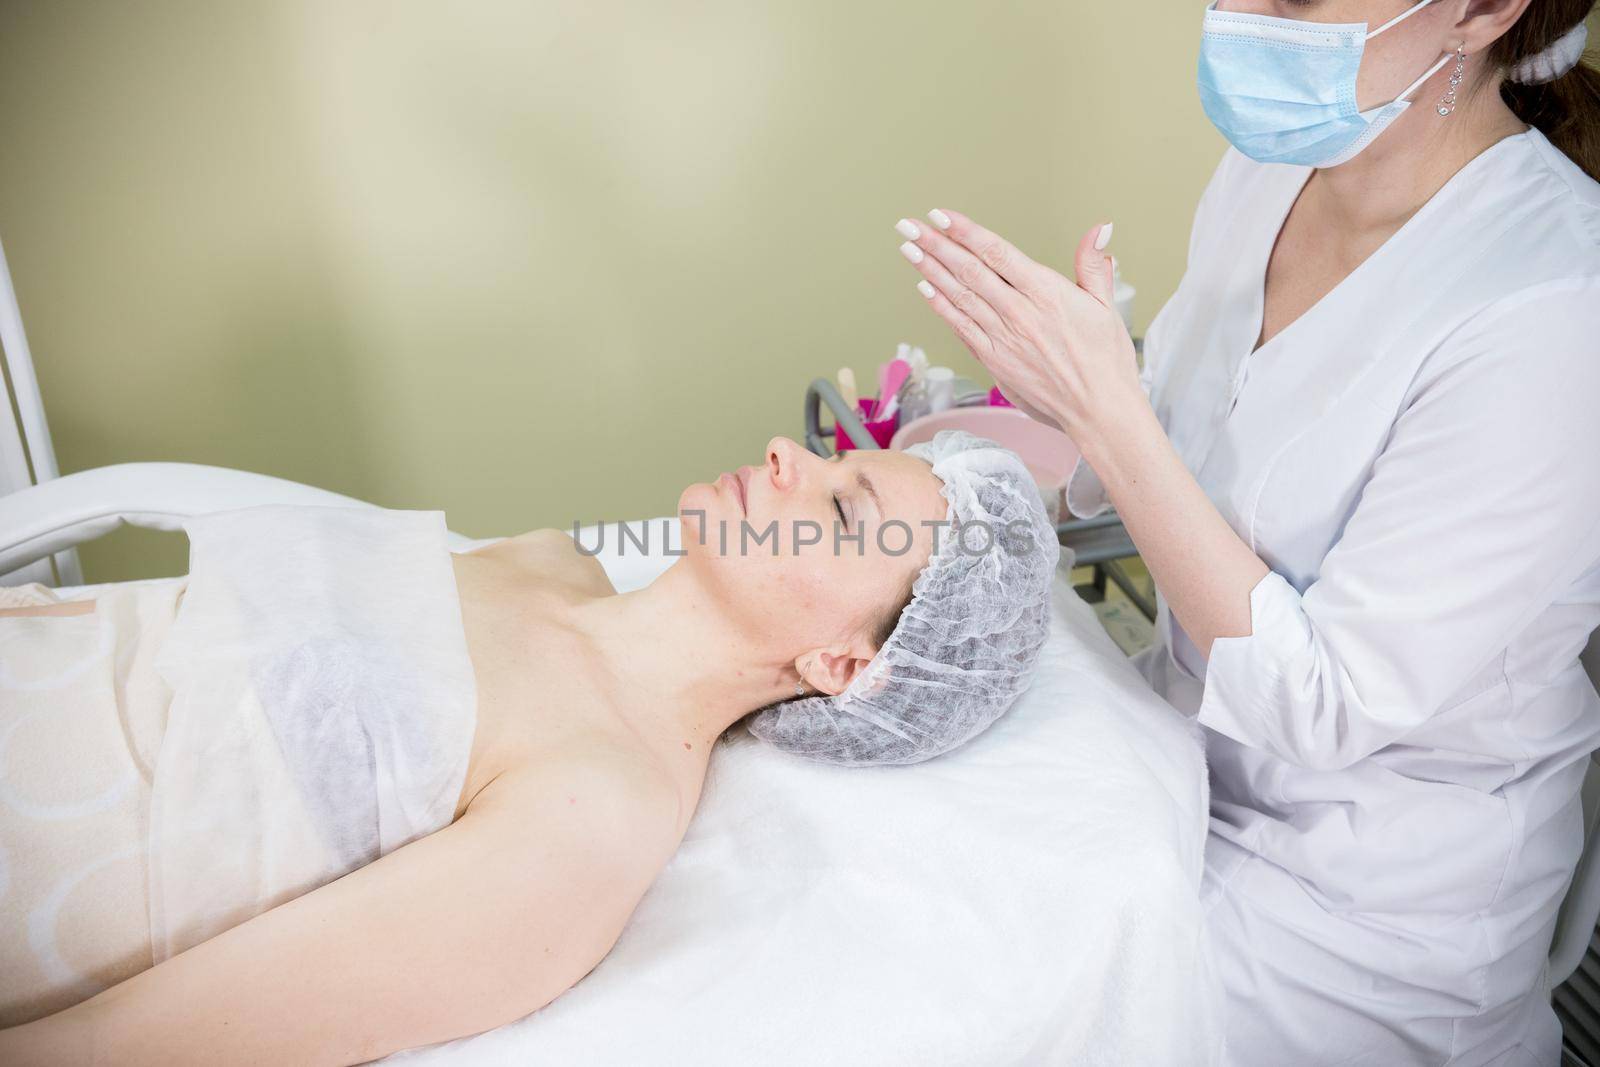 Cosmetologist prepares the client's face for cosmetic procedure of mesotherapy. Mid shot